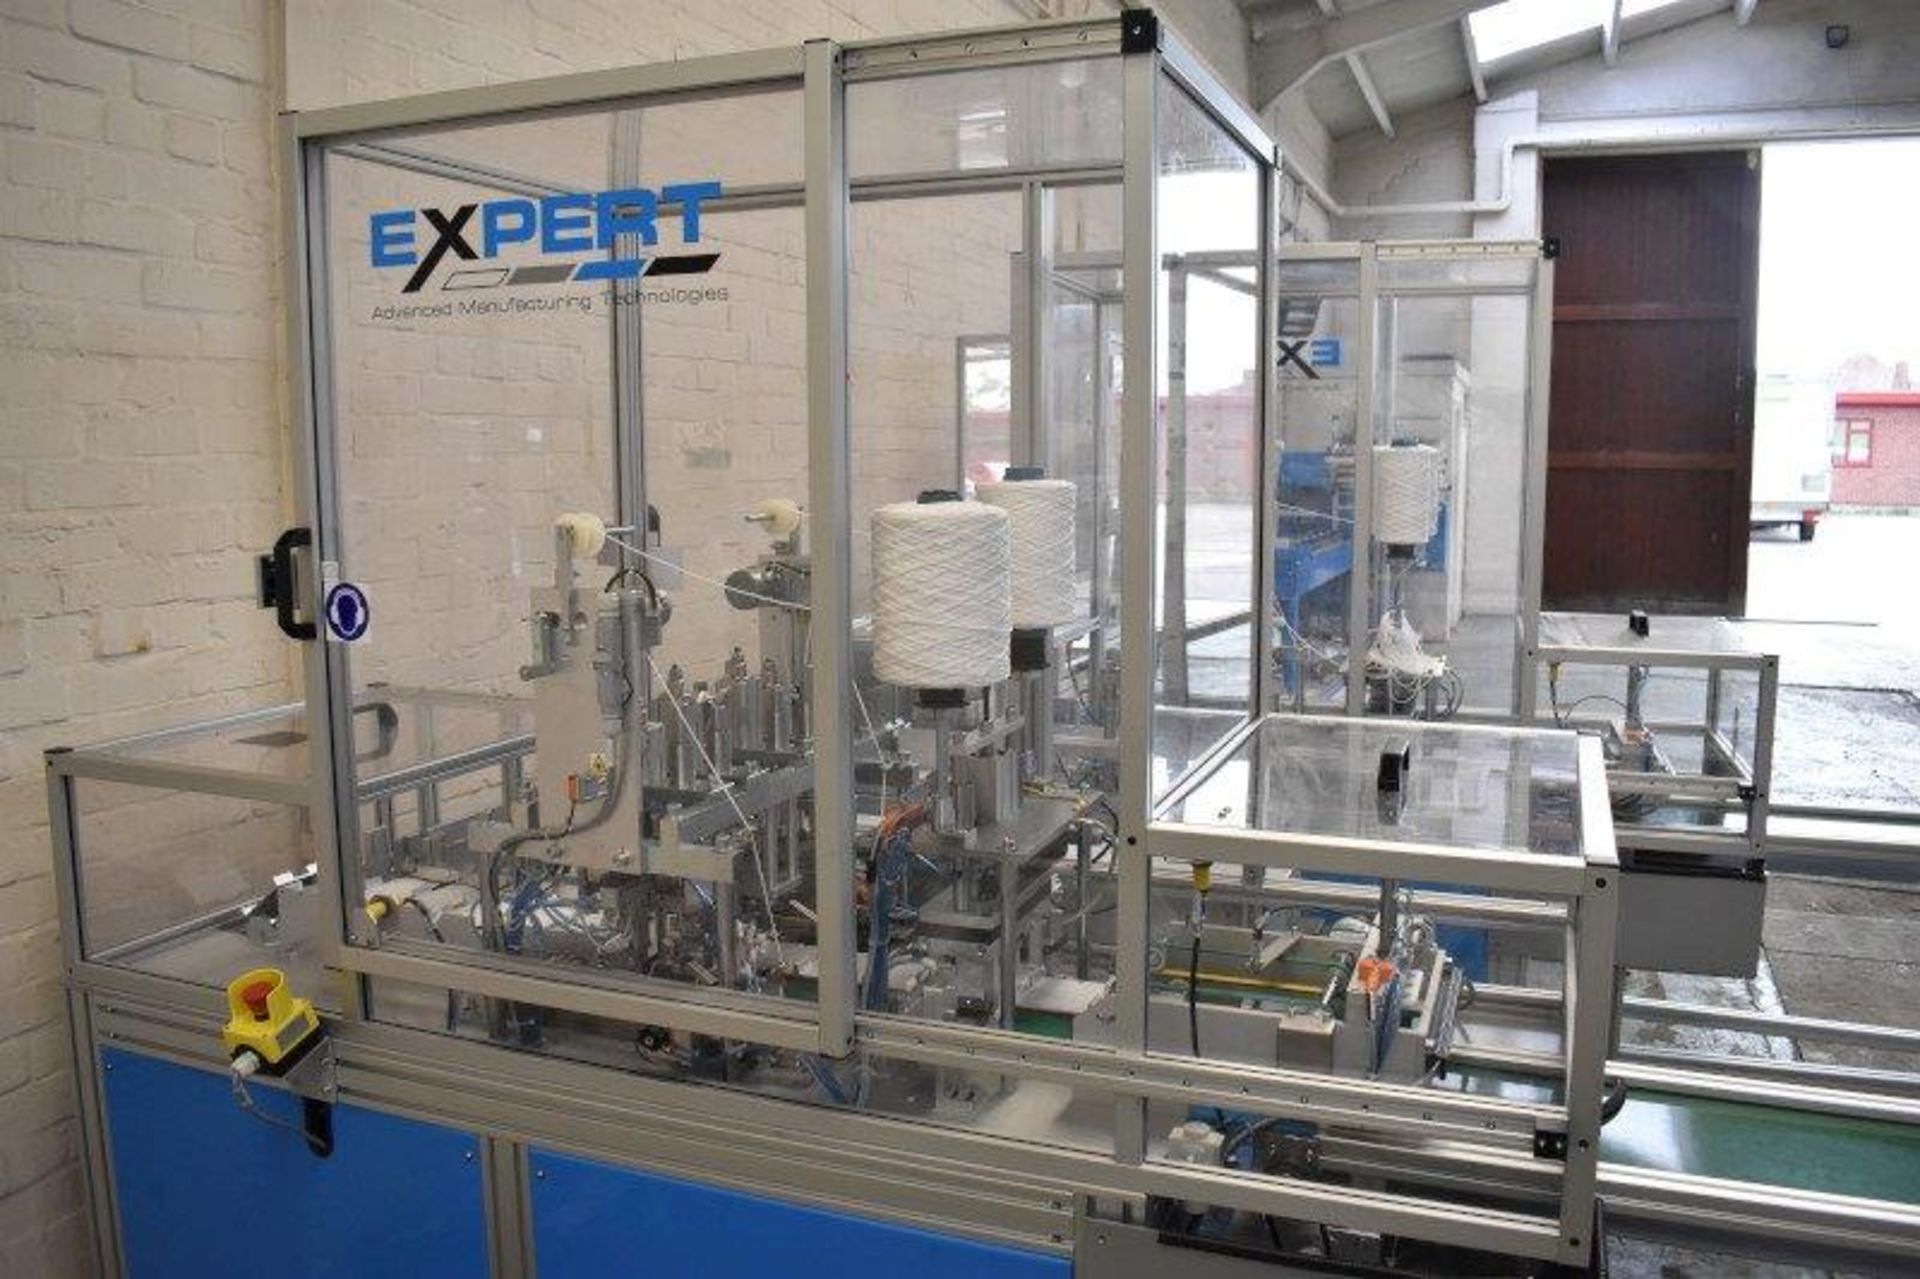 Expert fully automated Mask Making Machine - manufactured in 2020. - Image 17 of 20